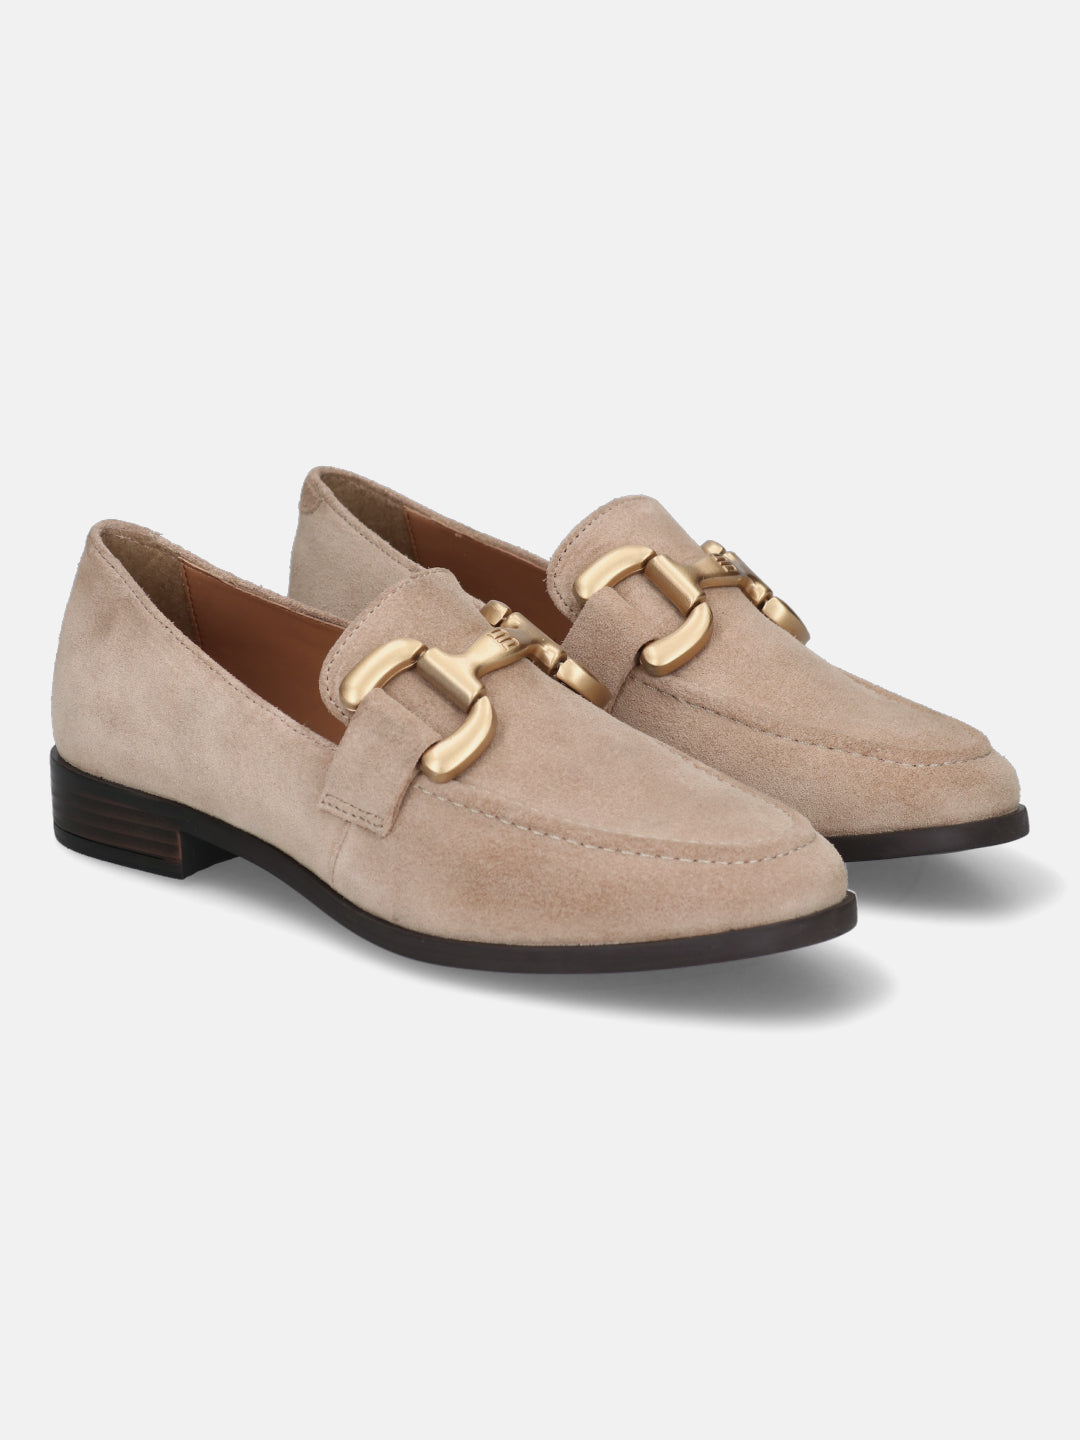 BAGATT Suede Leather Sand Loafers